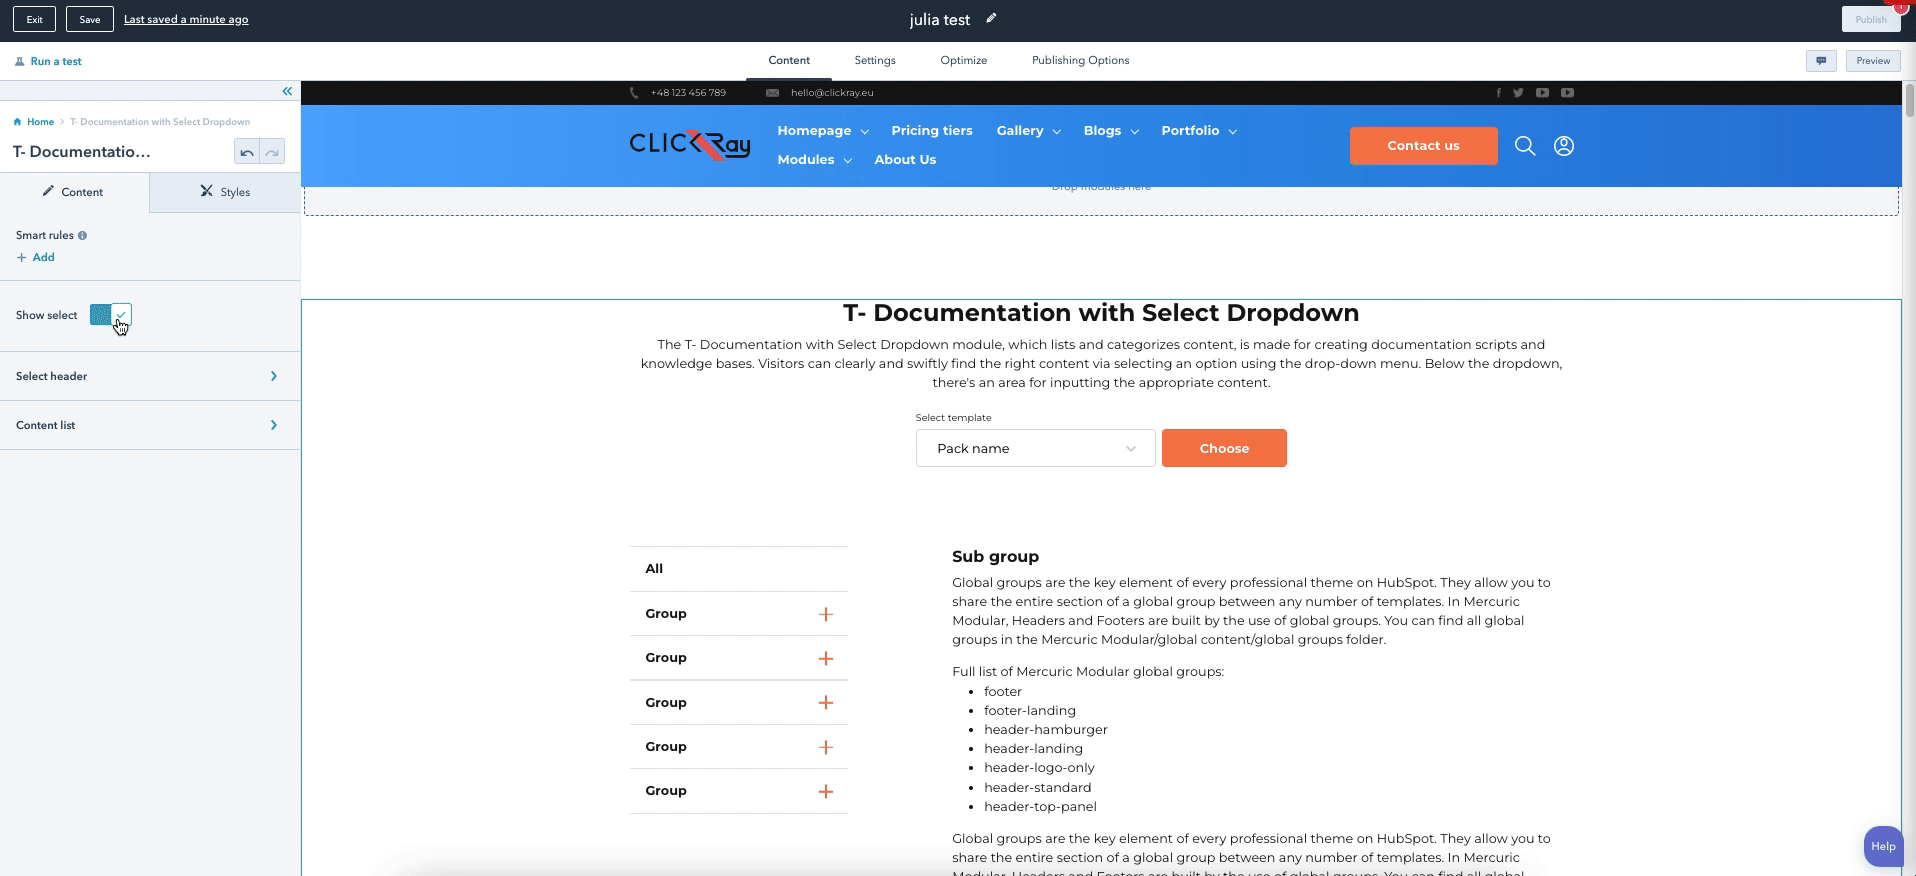 T- Documentation with Select Dropdown